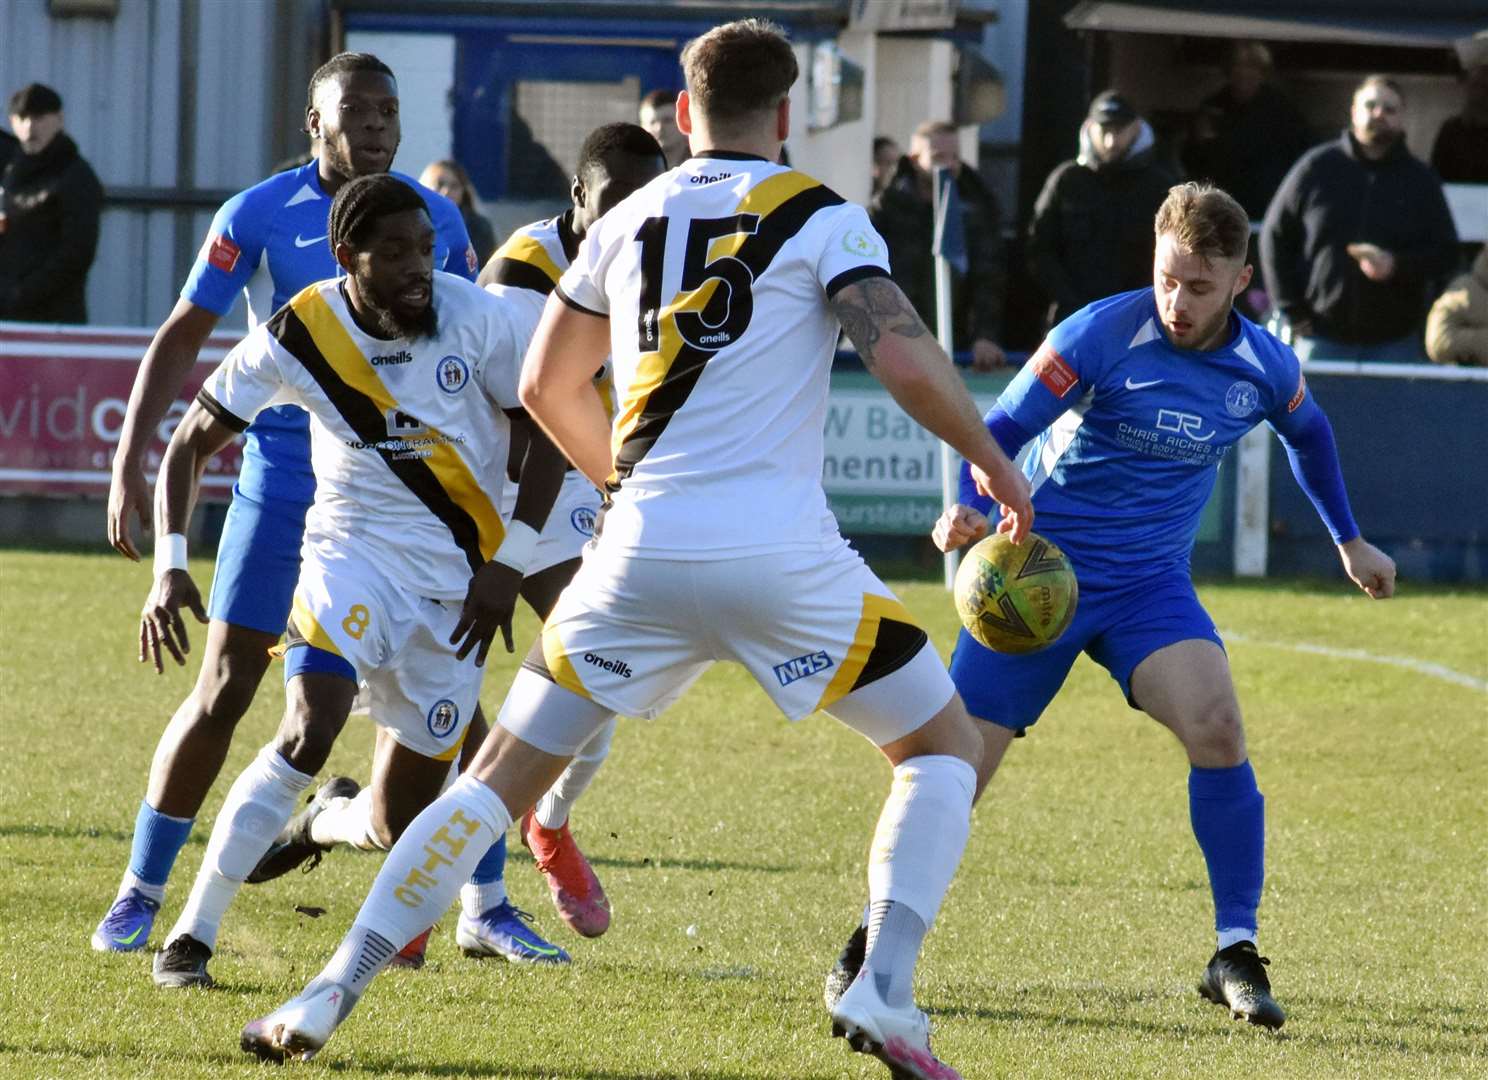 Action from the match between Herne Bay and Haywards Heath last month before the game was abandoned at half-time. Haywards Heath now have been awarded the points with Bay fined. Picture: Randolph File